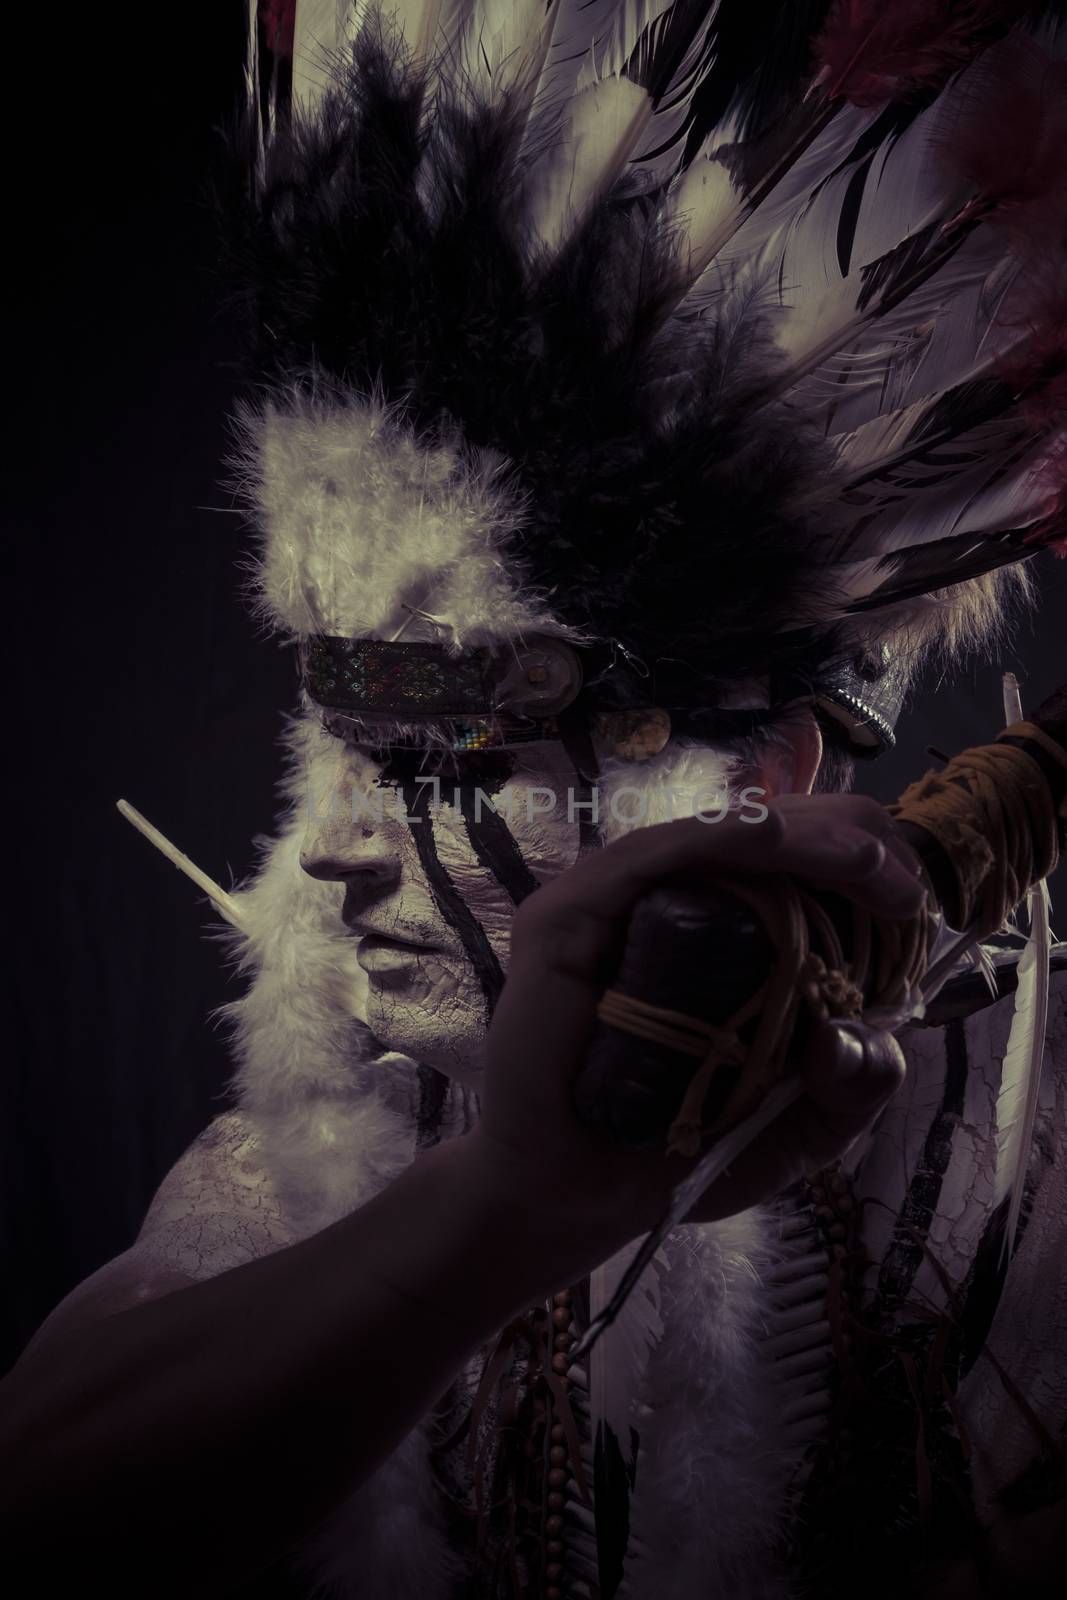 American Indian chief with big feather headdress, warrior